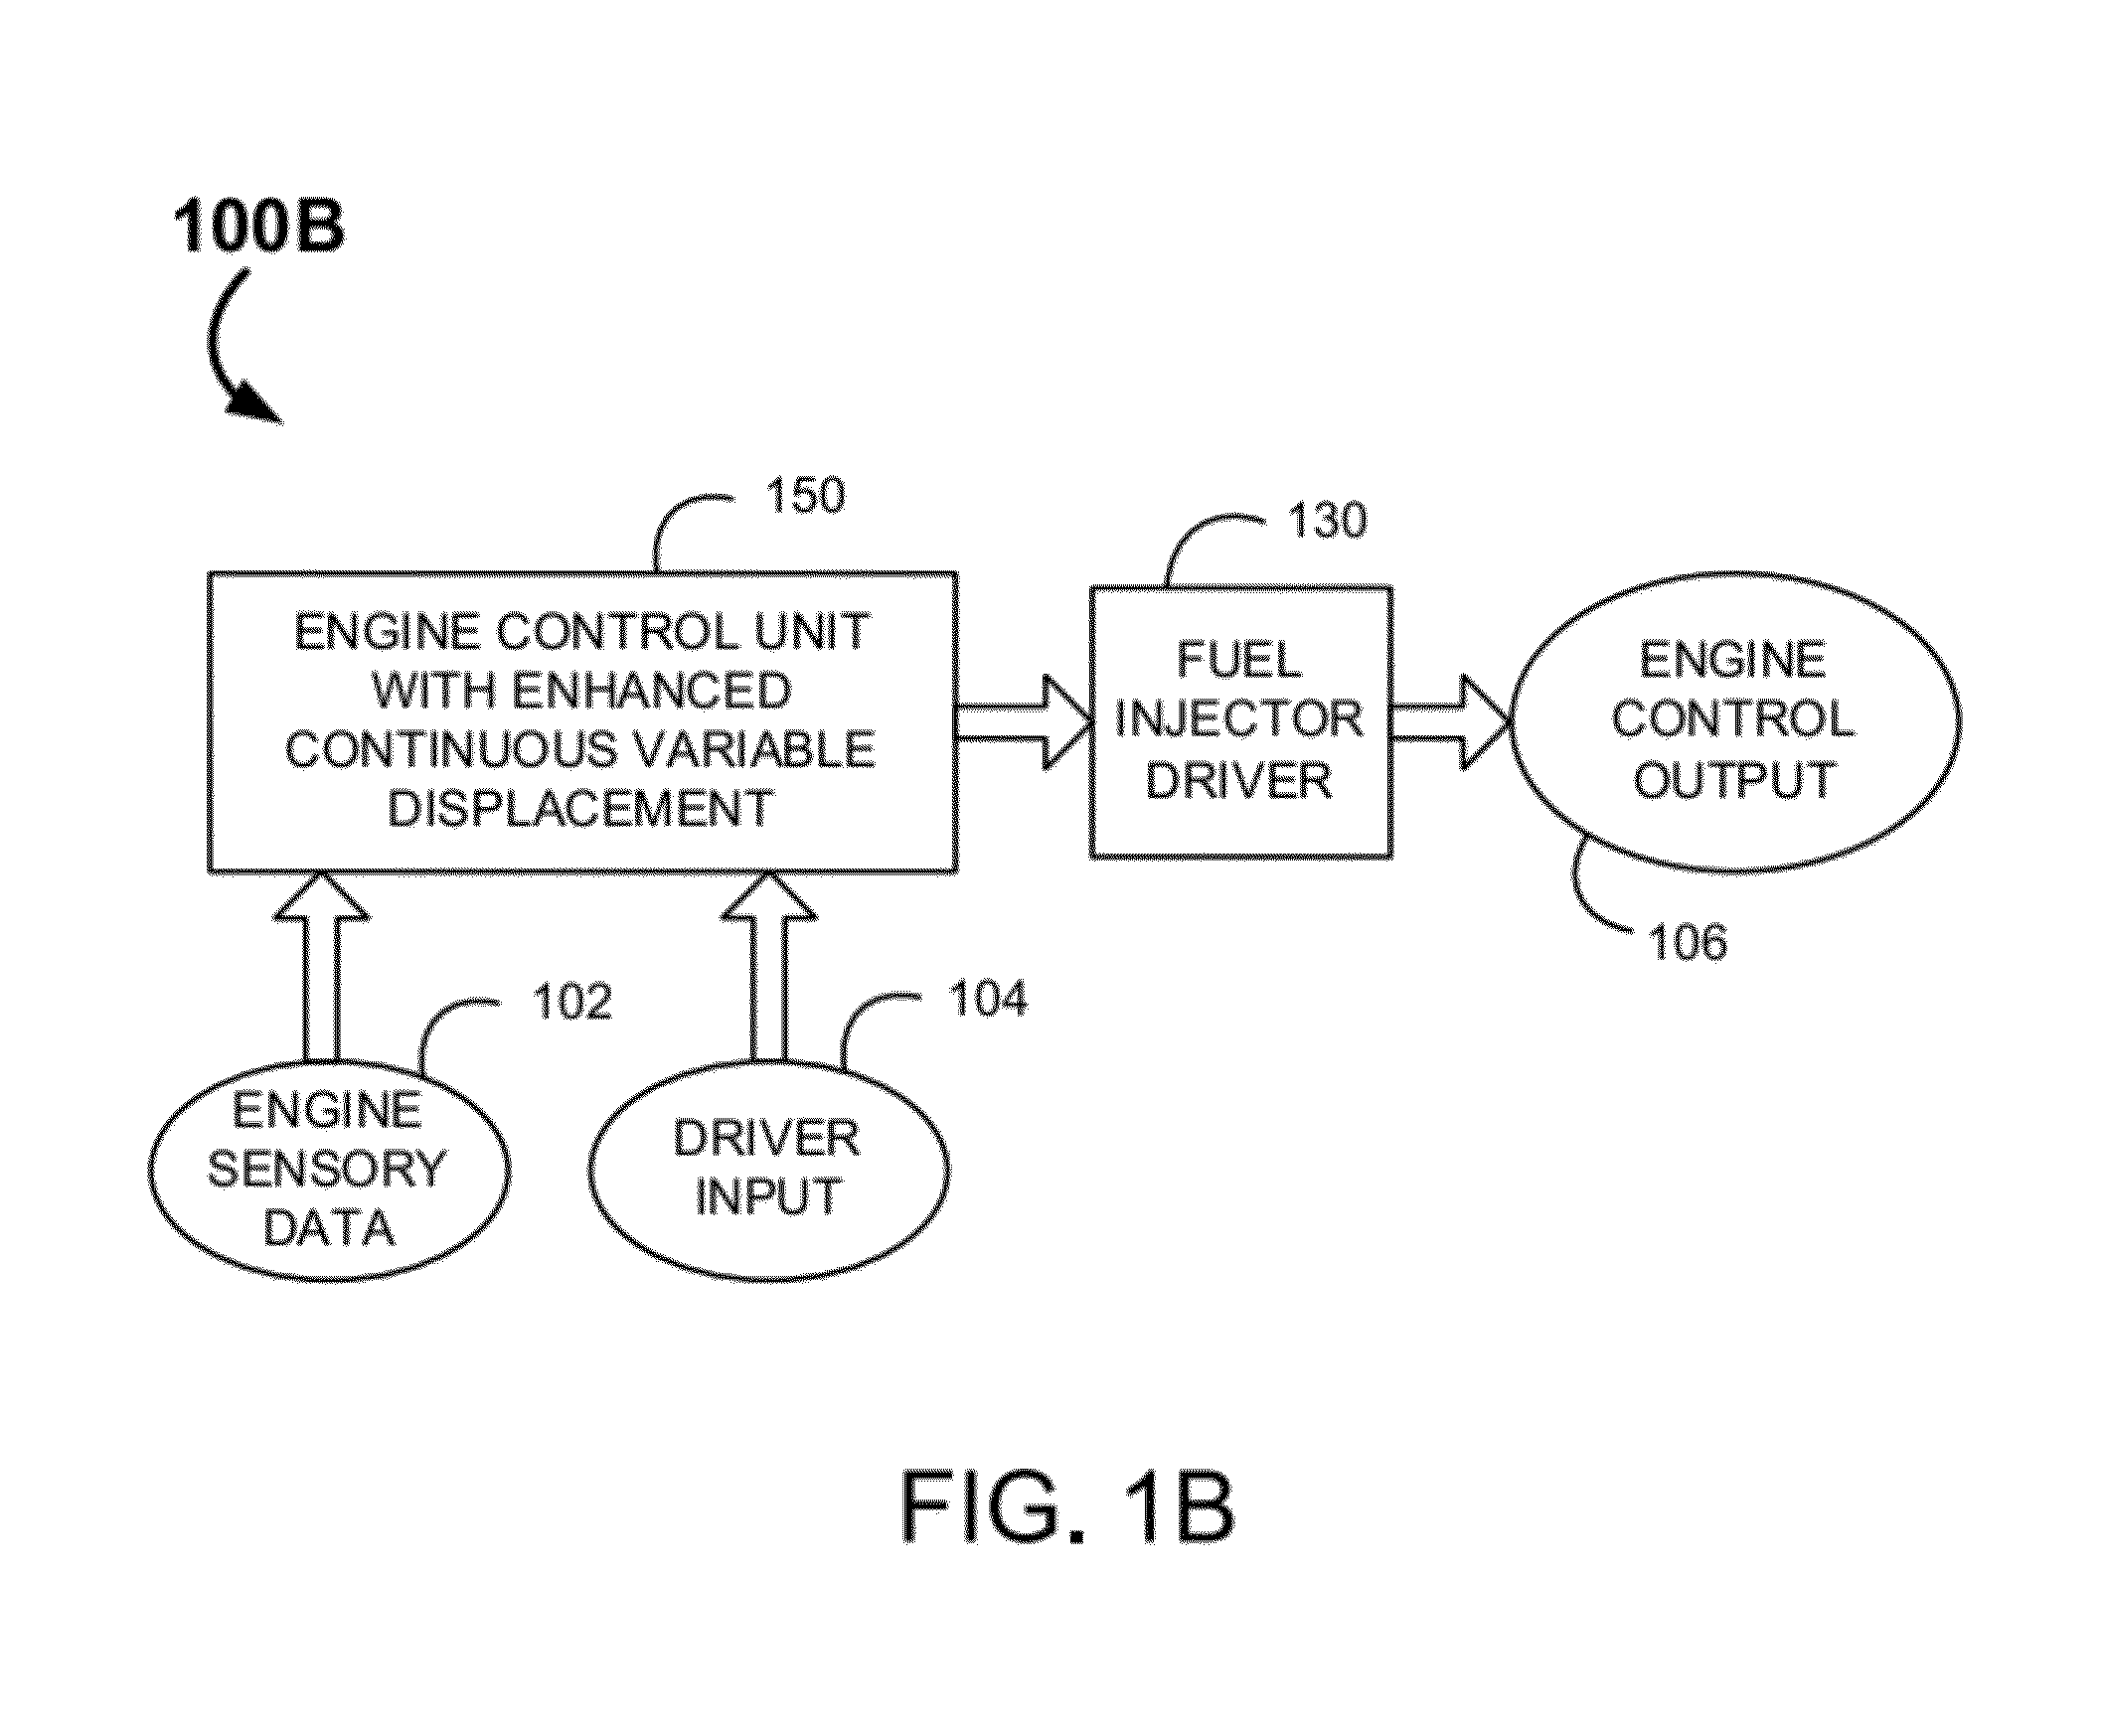 System and methods for improving efficiency in internal combustion engines